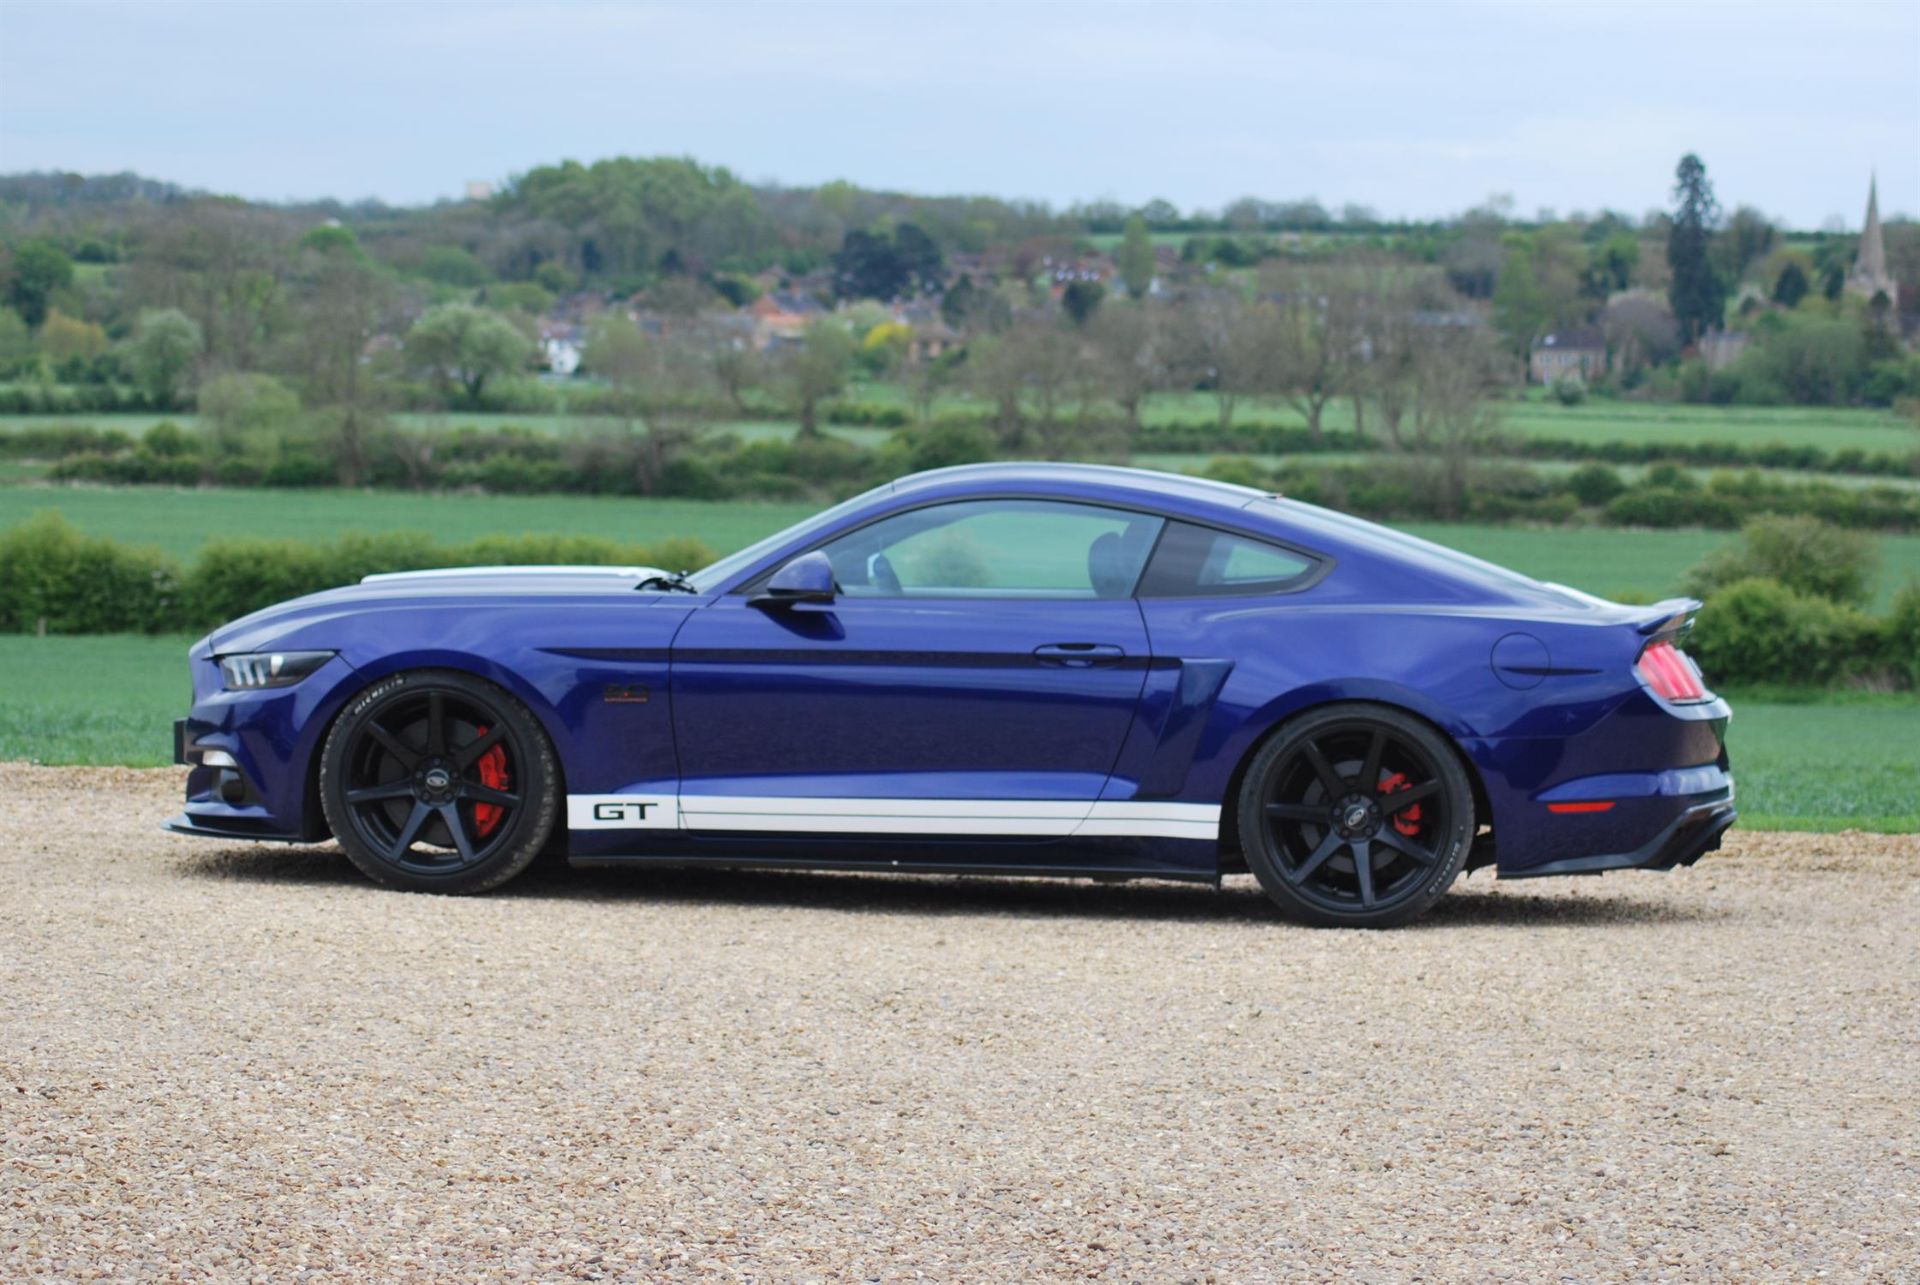 2016 Ford Mustang 5.0-Litre V8 GT S550 Roush Supercharged - Image 8 of 10